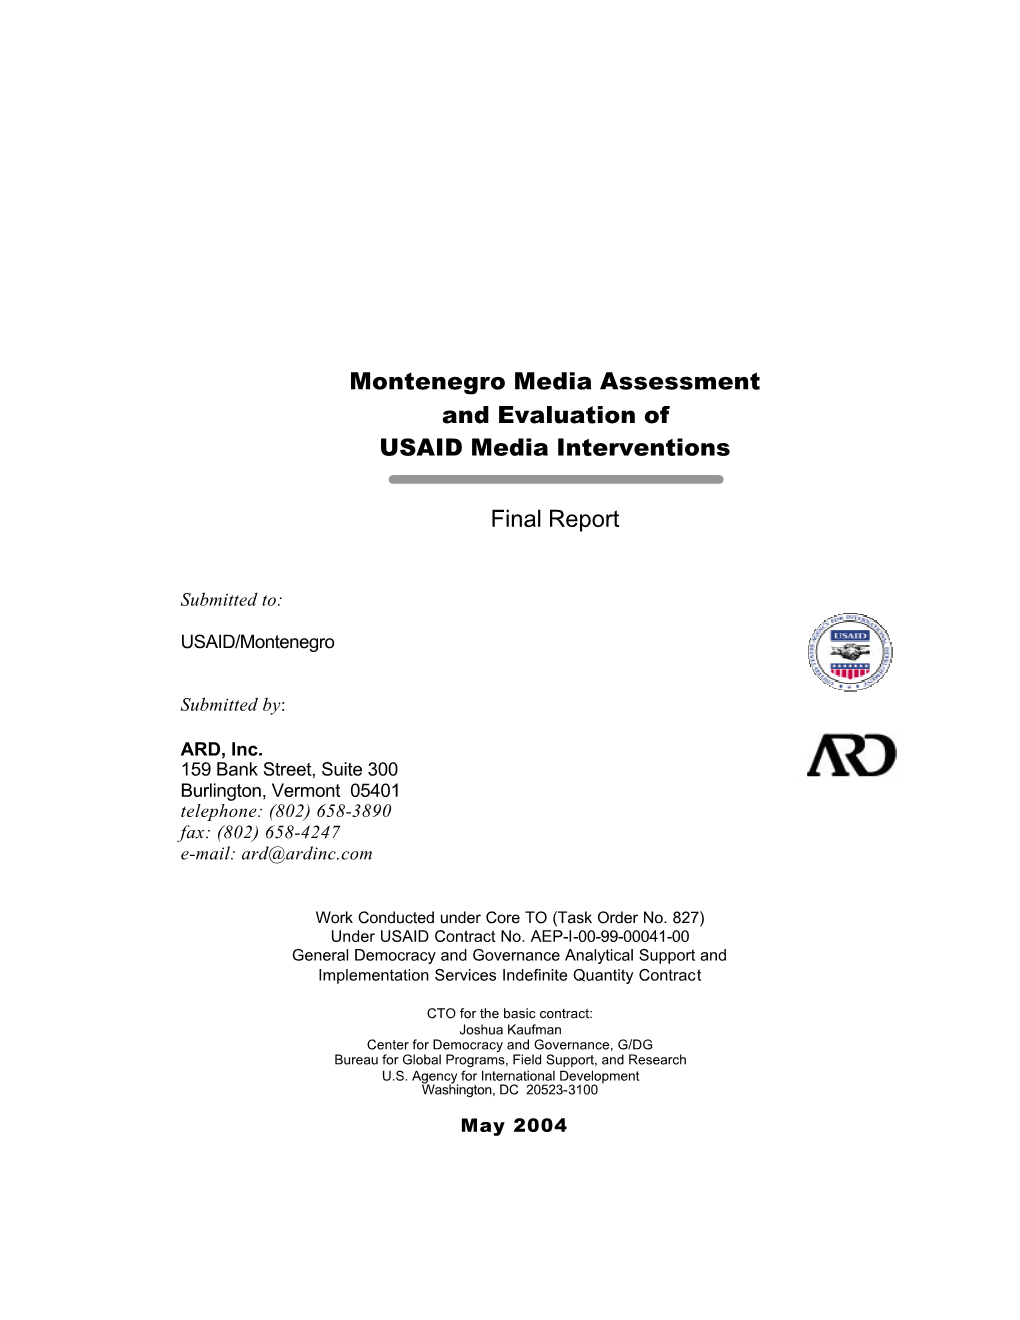 Montenegro Media Assessment and Evaluation of USAID Media Interventions